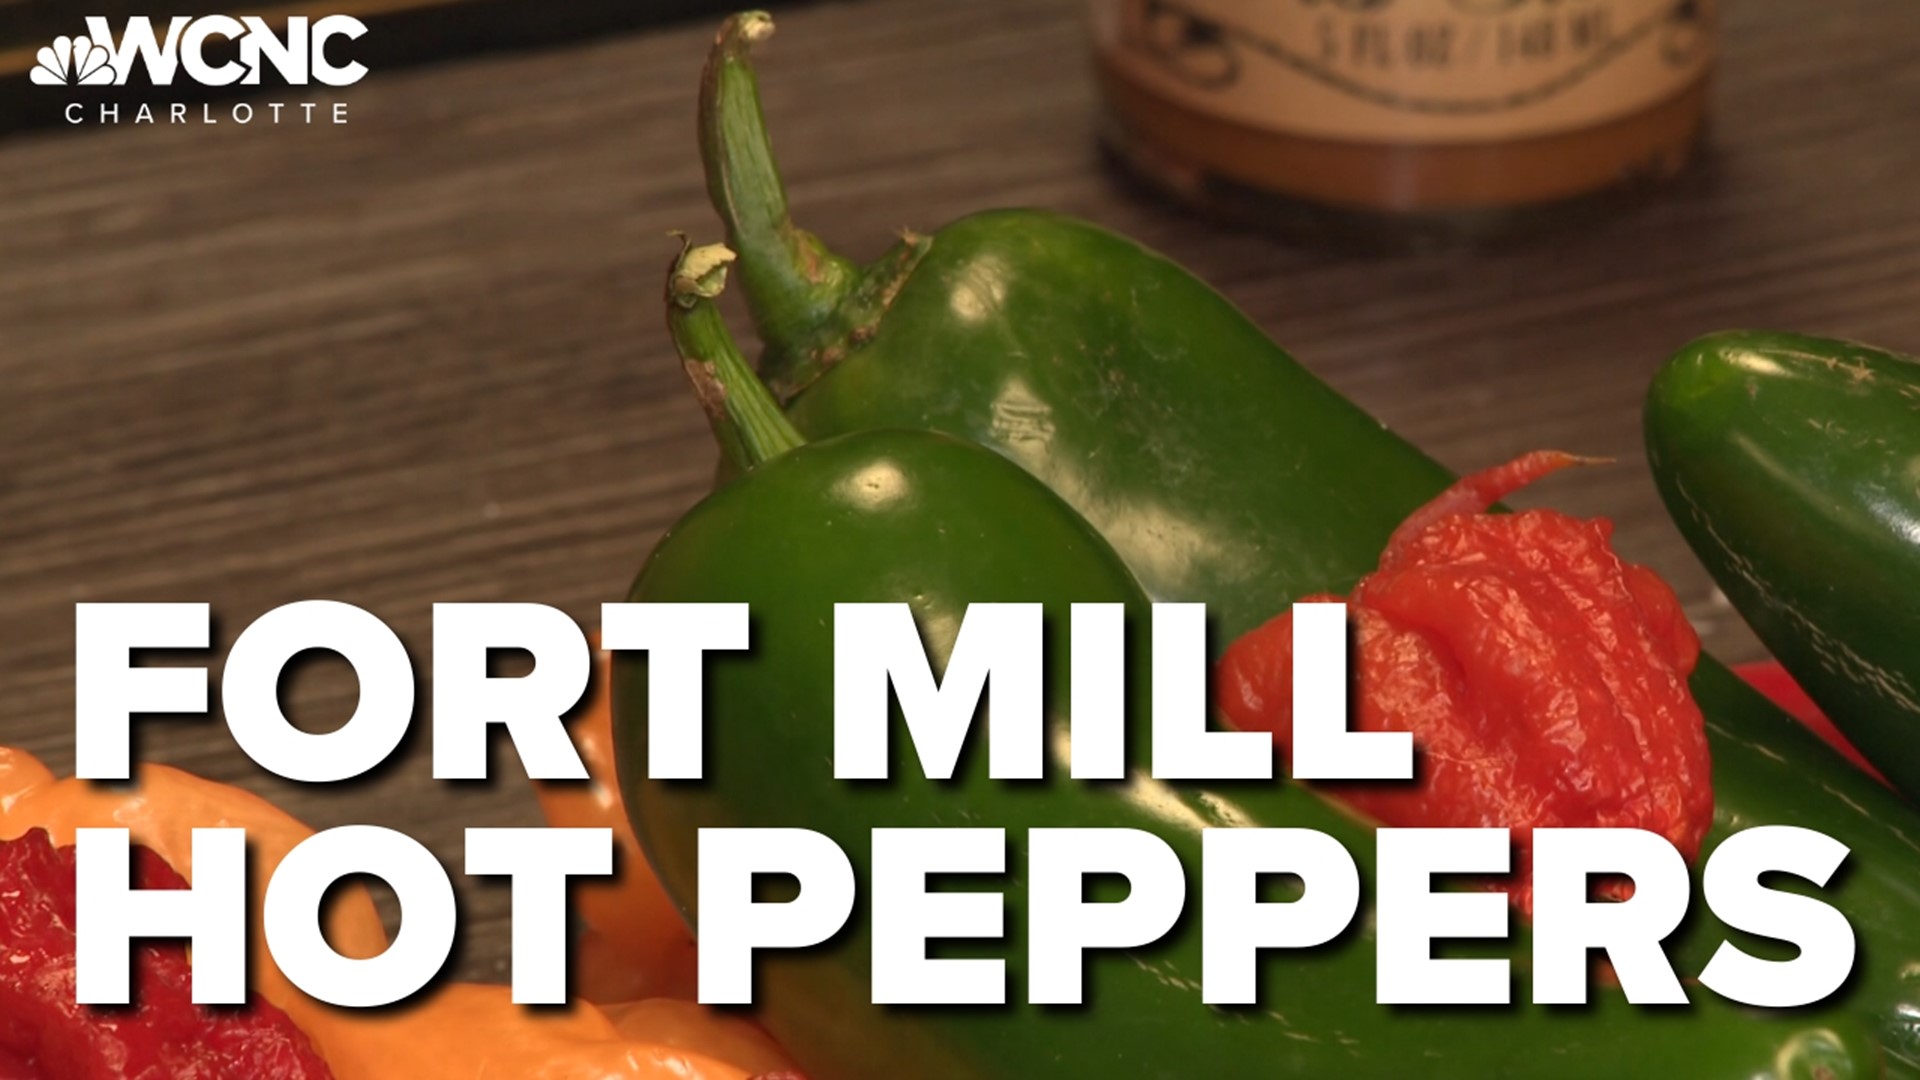 PuckerButt Pepper Company is famous for creating the Carolina Reaper. Now they're cooking up something even hotter.